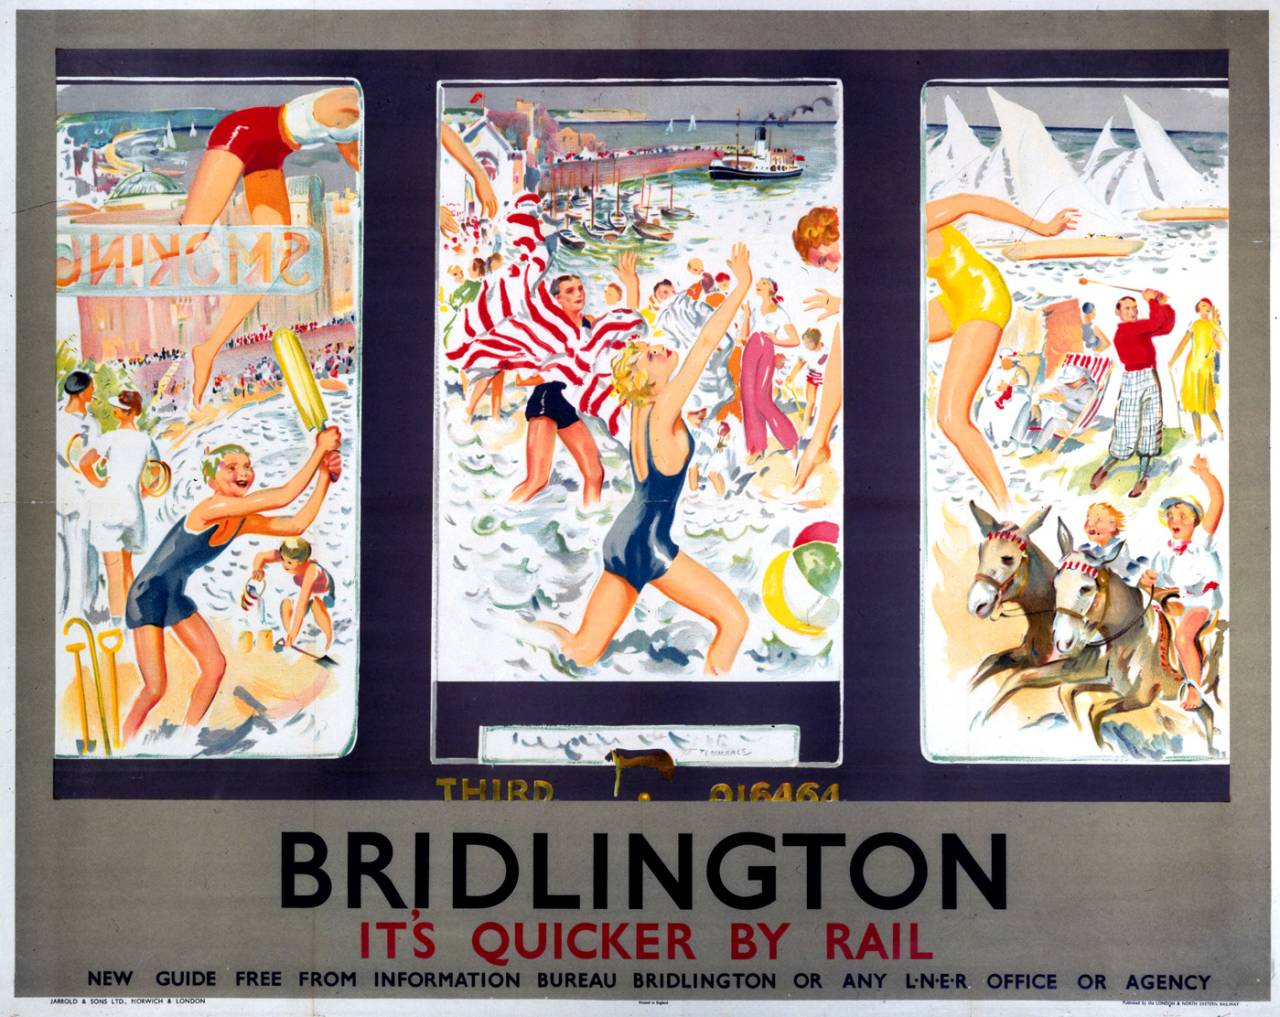 An advertisement poster by London & North Eastern Railway encourages rail travel to Bridlington, 1935